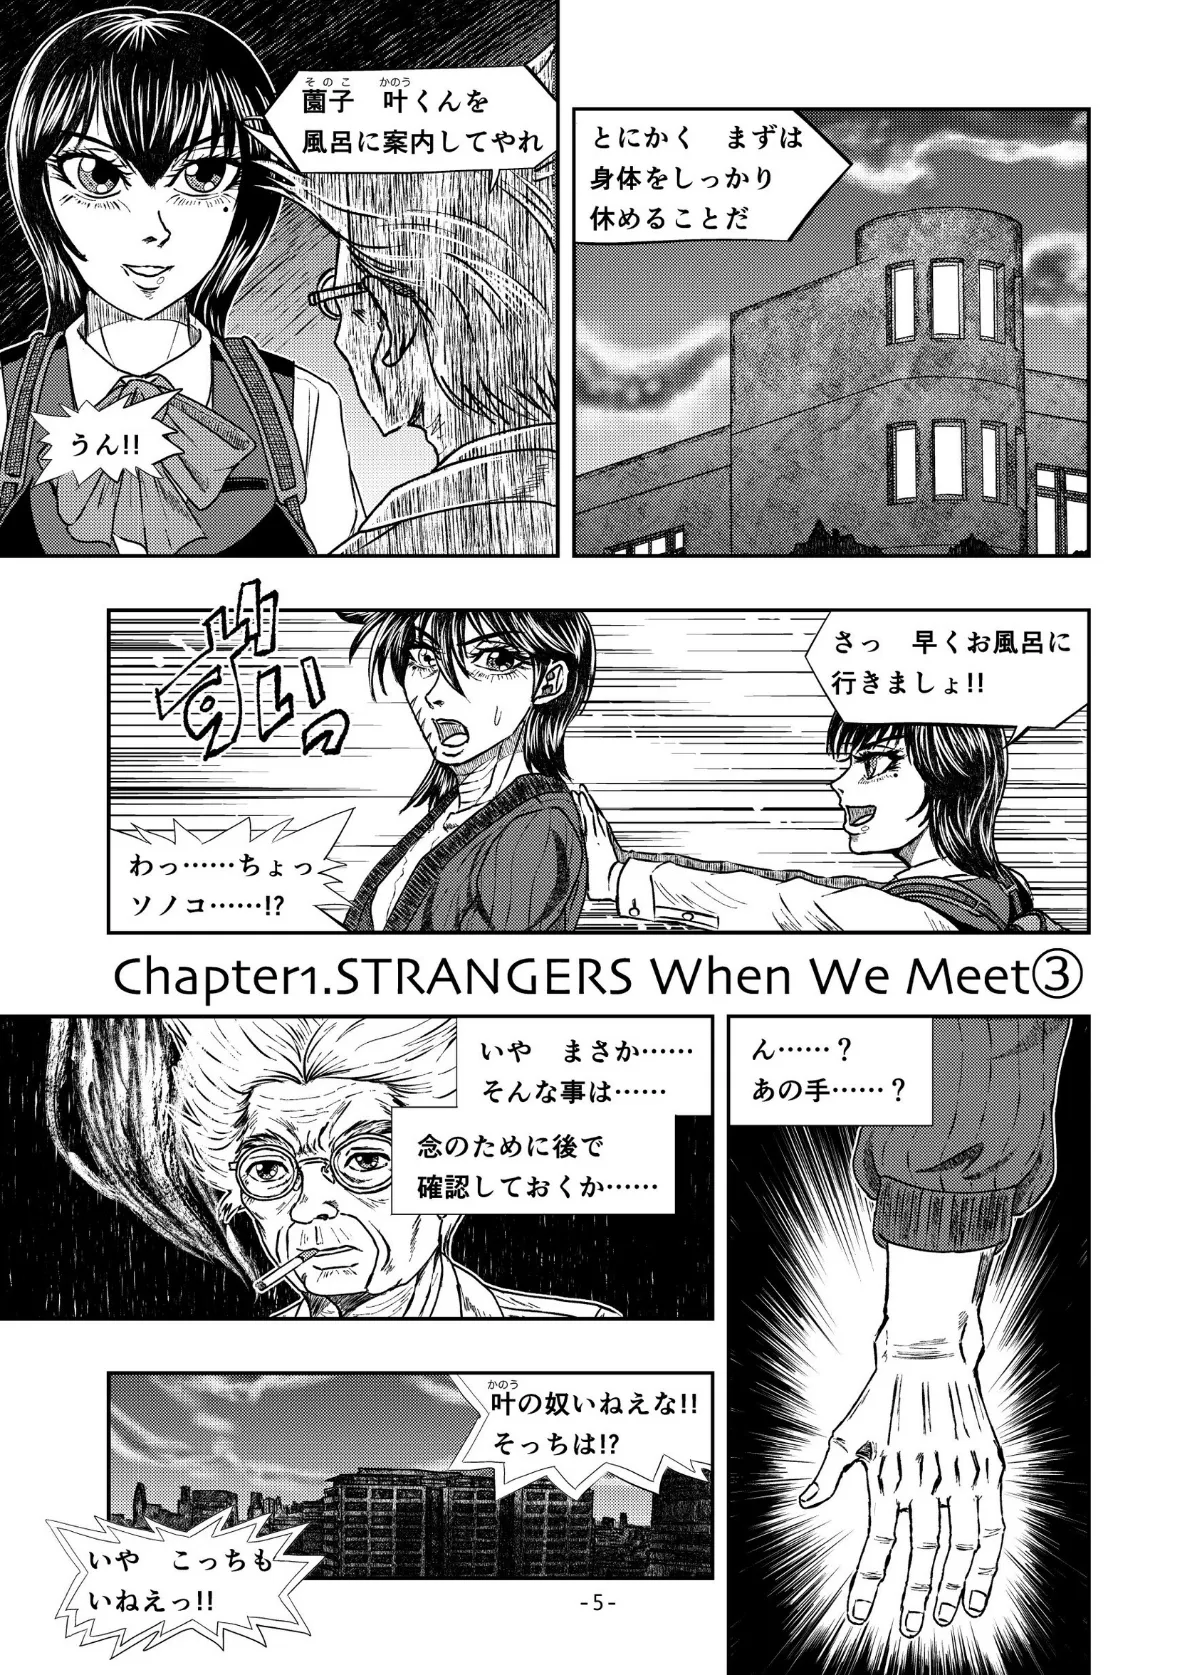 XENON REBOOT＜BASED STORY ON ’BIO DIVER XENON’＞【分冊版】 Chapter1 STRANGERS When We Meet（3） 5ページ